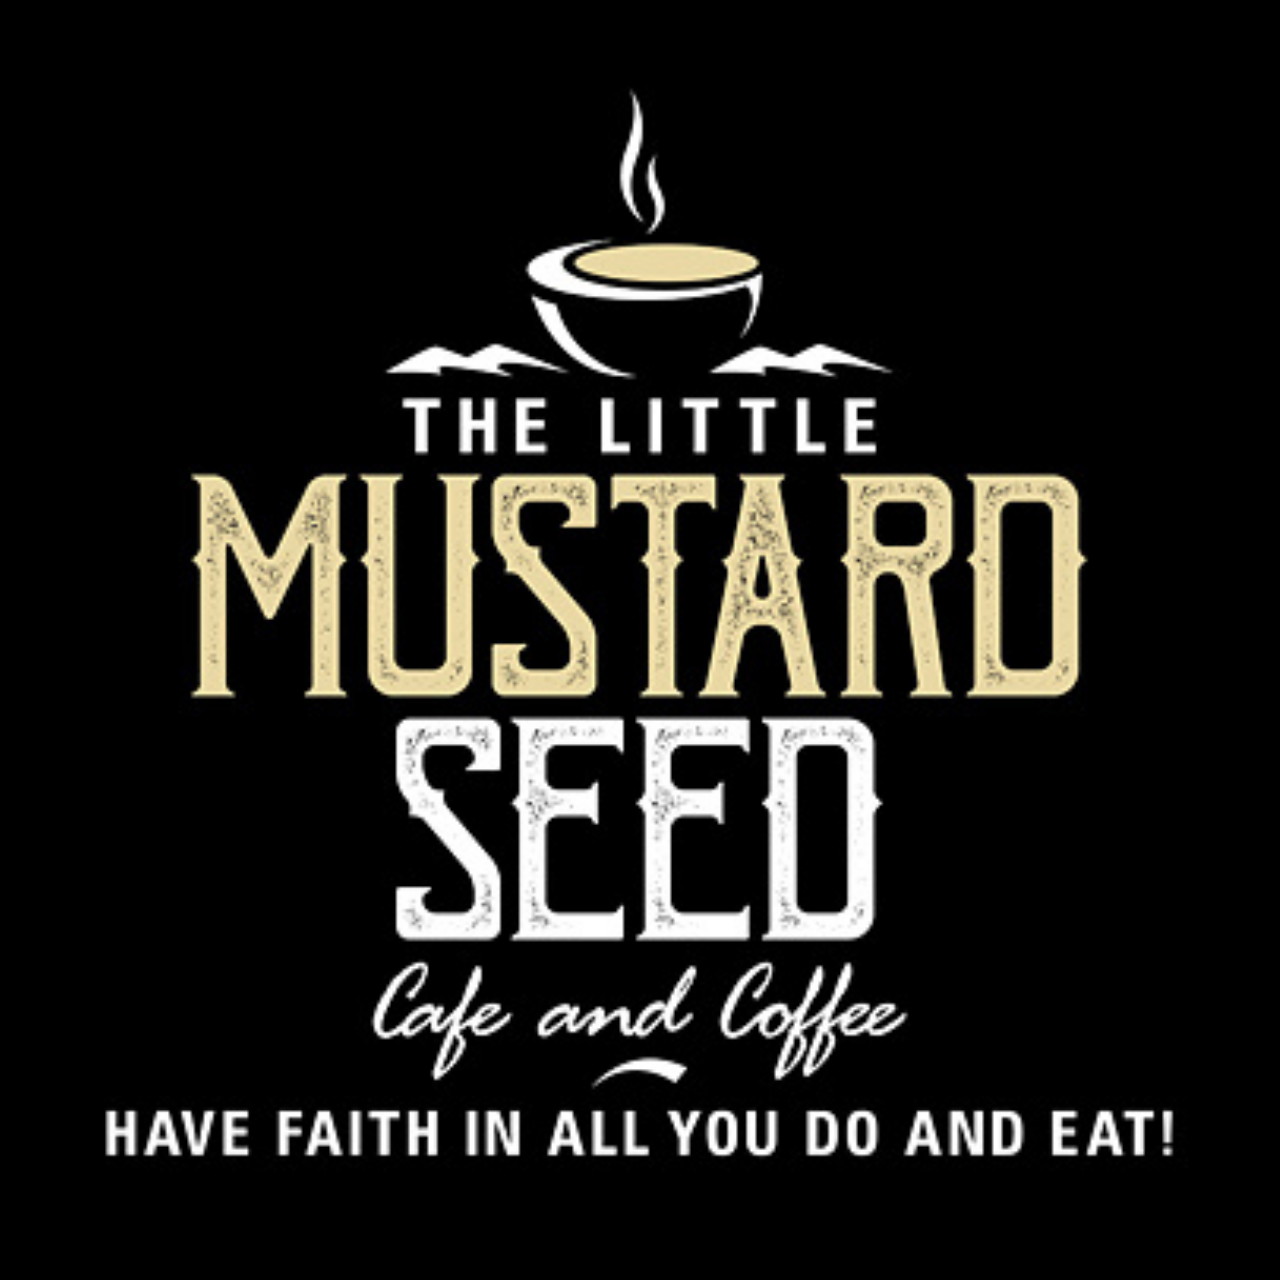 The Little Mustard Seed Cafe & Coffee